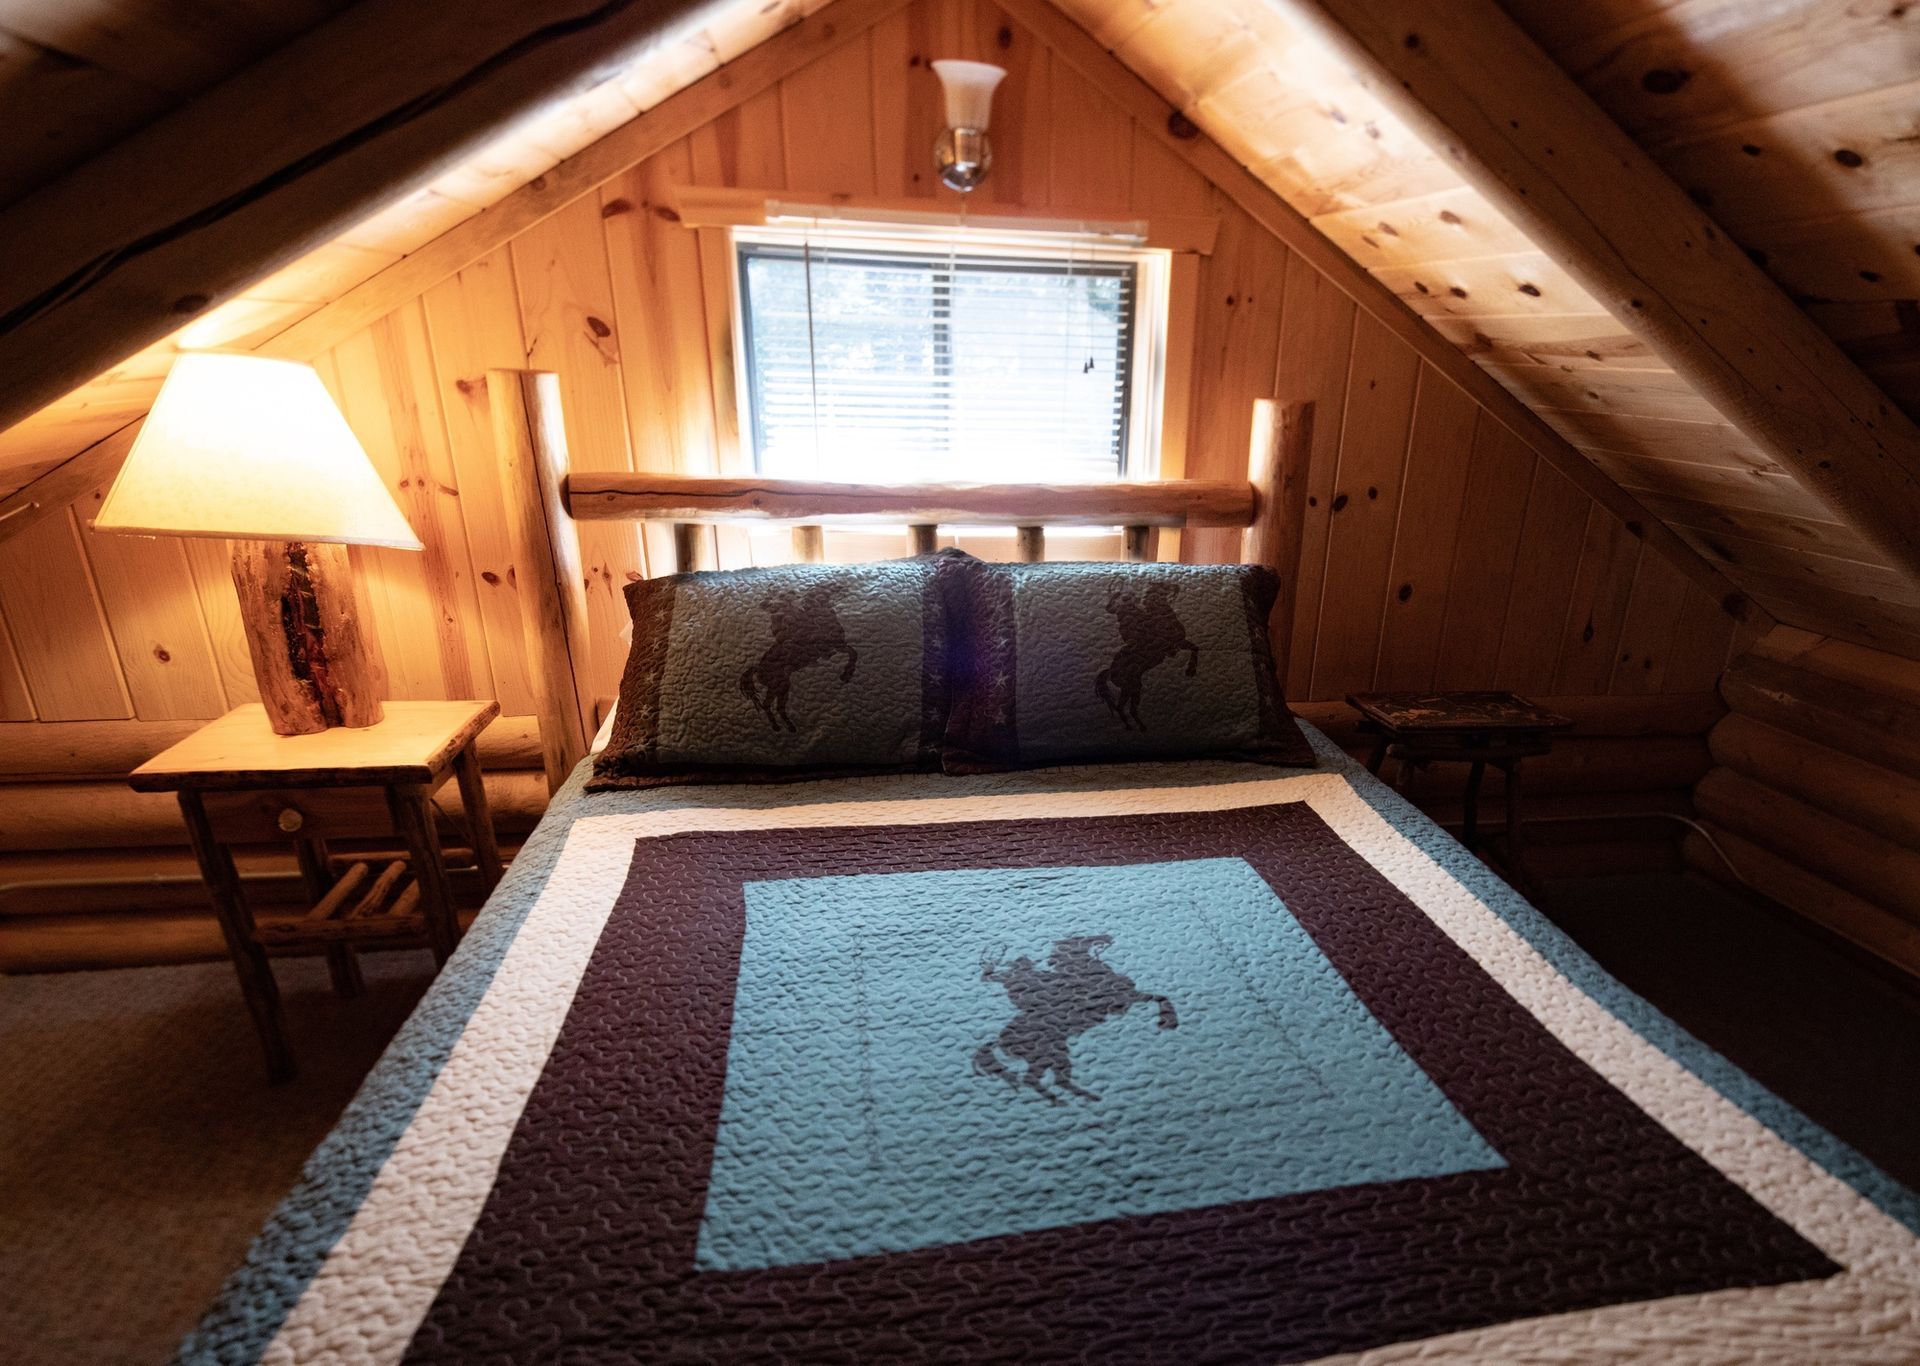 A bedroom in a log cabin with a bed and a lamp